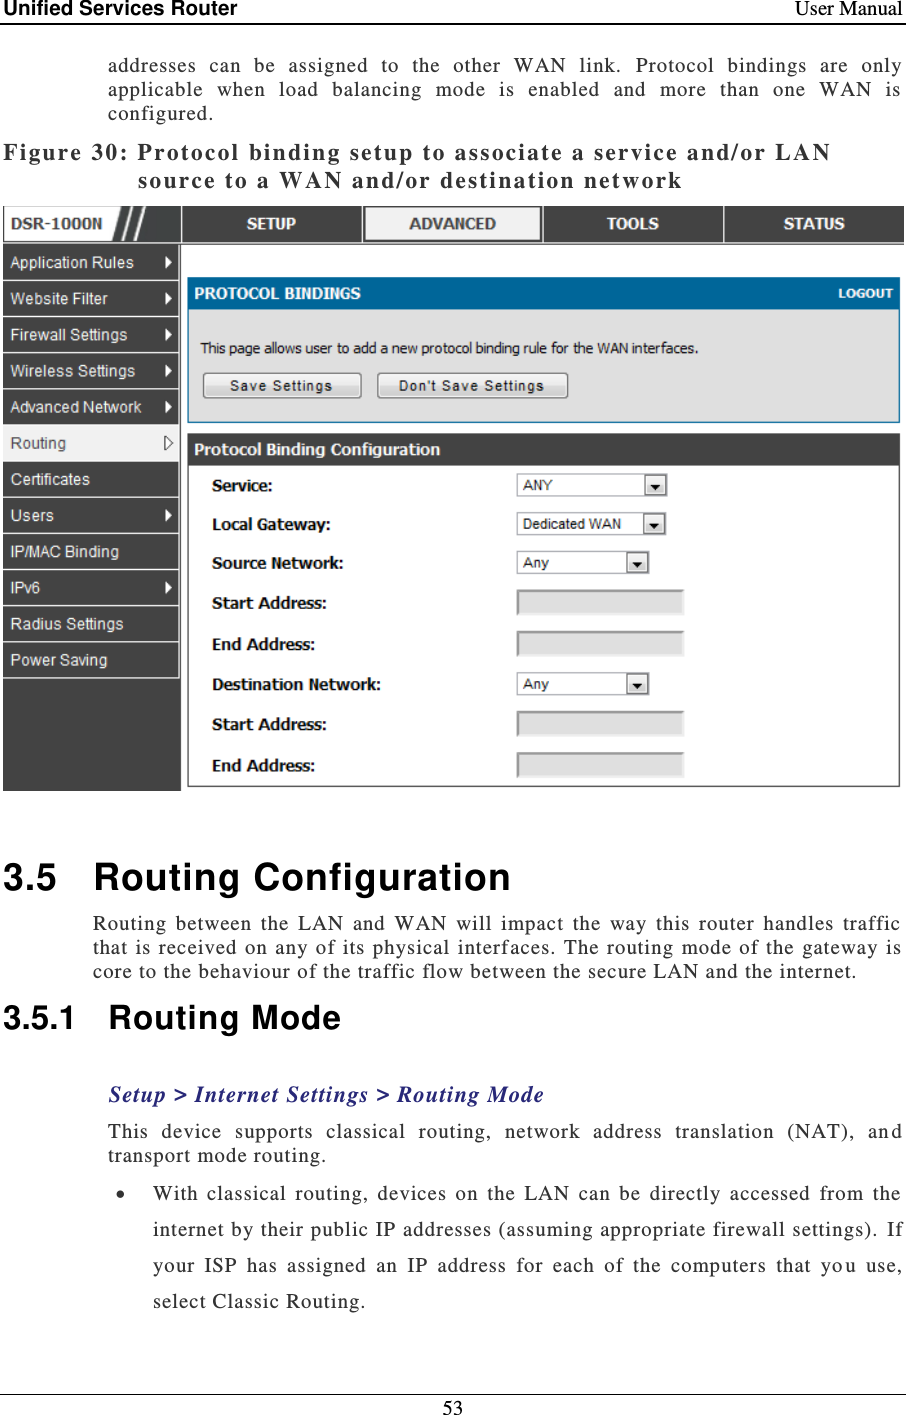 Unified Services Router    User Manual 53  addresses  can  be  assigned  to  the  other  WAN  link.   Protocol  bindings  are  only applicable  when  load  balancing  mode  is  enabled  and  more  than  one  WAN  is configured.  Figure 30: Protocol binding setup to associate a service a nd/or LAN so urce to a WAN  and/or destination network    3.5  Routing Configuration Routing  between  the  LAN  and  WAN  will  impact  the  way  this  router  handles  traffic that is  received  on  any  of its  physical interf aces.  The routing mode  of  the  gateway is core to the behaviour of the traffic flow between the secure LAN and the internet.   3.5.1  Routing Mode Setup &gt; Internet Settings &gt; Routing Mode This  device  supports  classical  routing,  network  address  translation  (NAT),  an d transport mode routing.   With  classical  routing,  devices  on  the  LAN  can  be  directly  accessed  from  the internet by their public IP addresses (assuming appropriate firewall settings).  If your  ISP  has  assigned  an  IP  address  for  each  of  the  computers  that  yo u  use, select Classic Routing.  